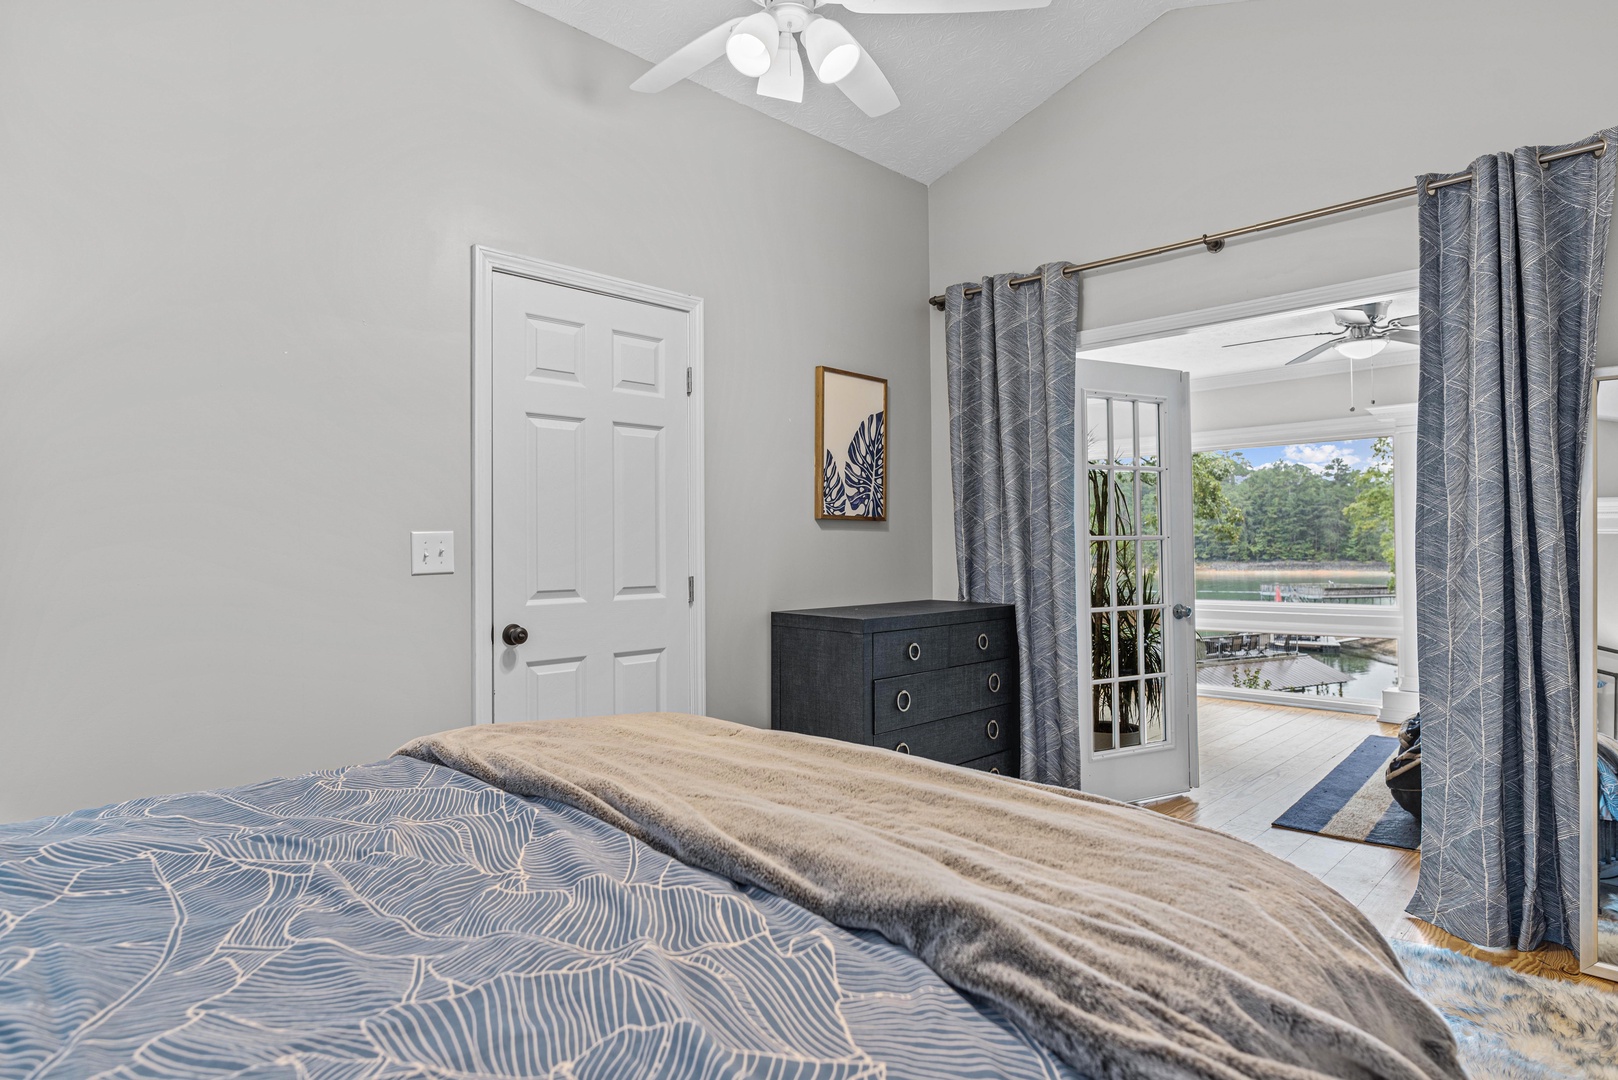 The primary bedroom offers a queen bed, ceiling fan, & sunroom access